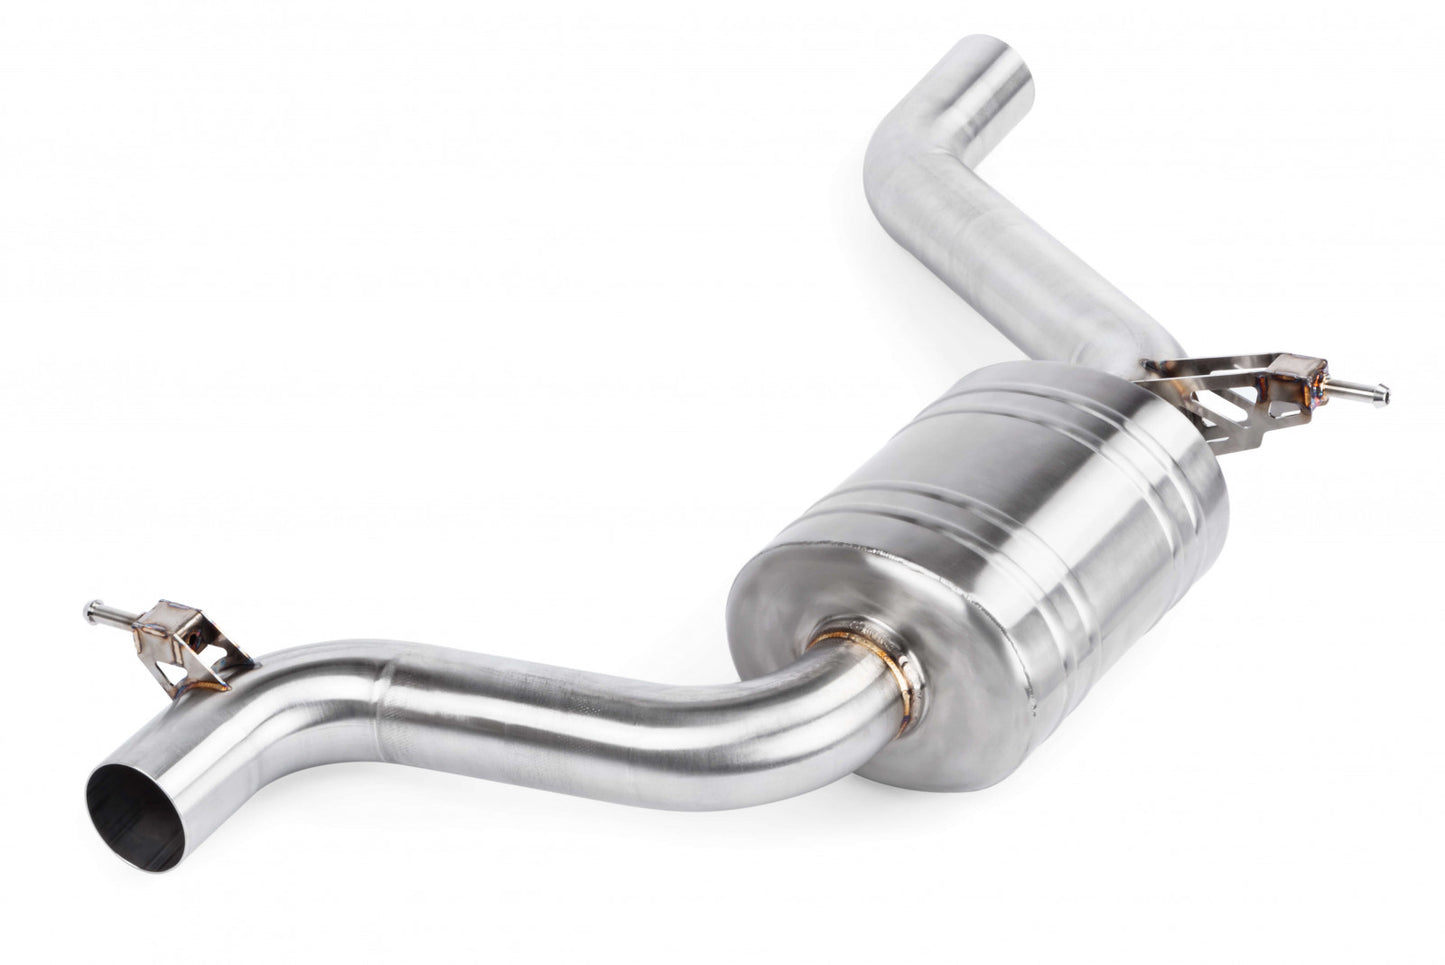 APR Exhaust - Catback System with Front Muffler - MK7 GTI CBK0008